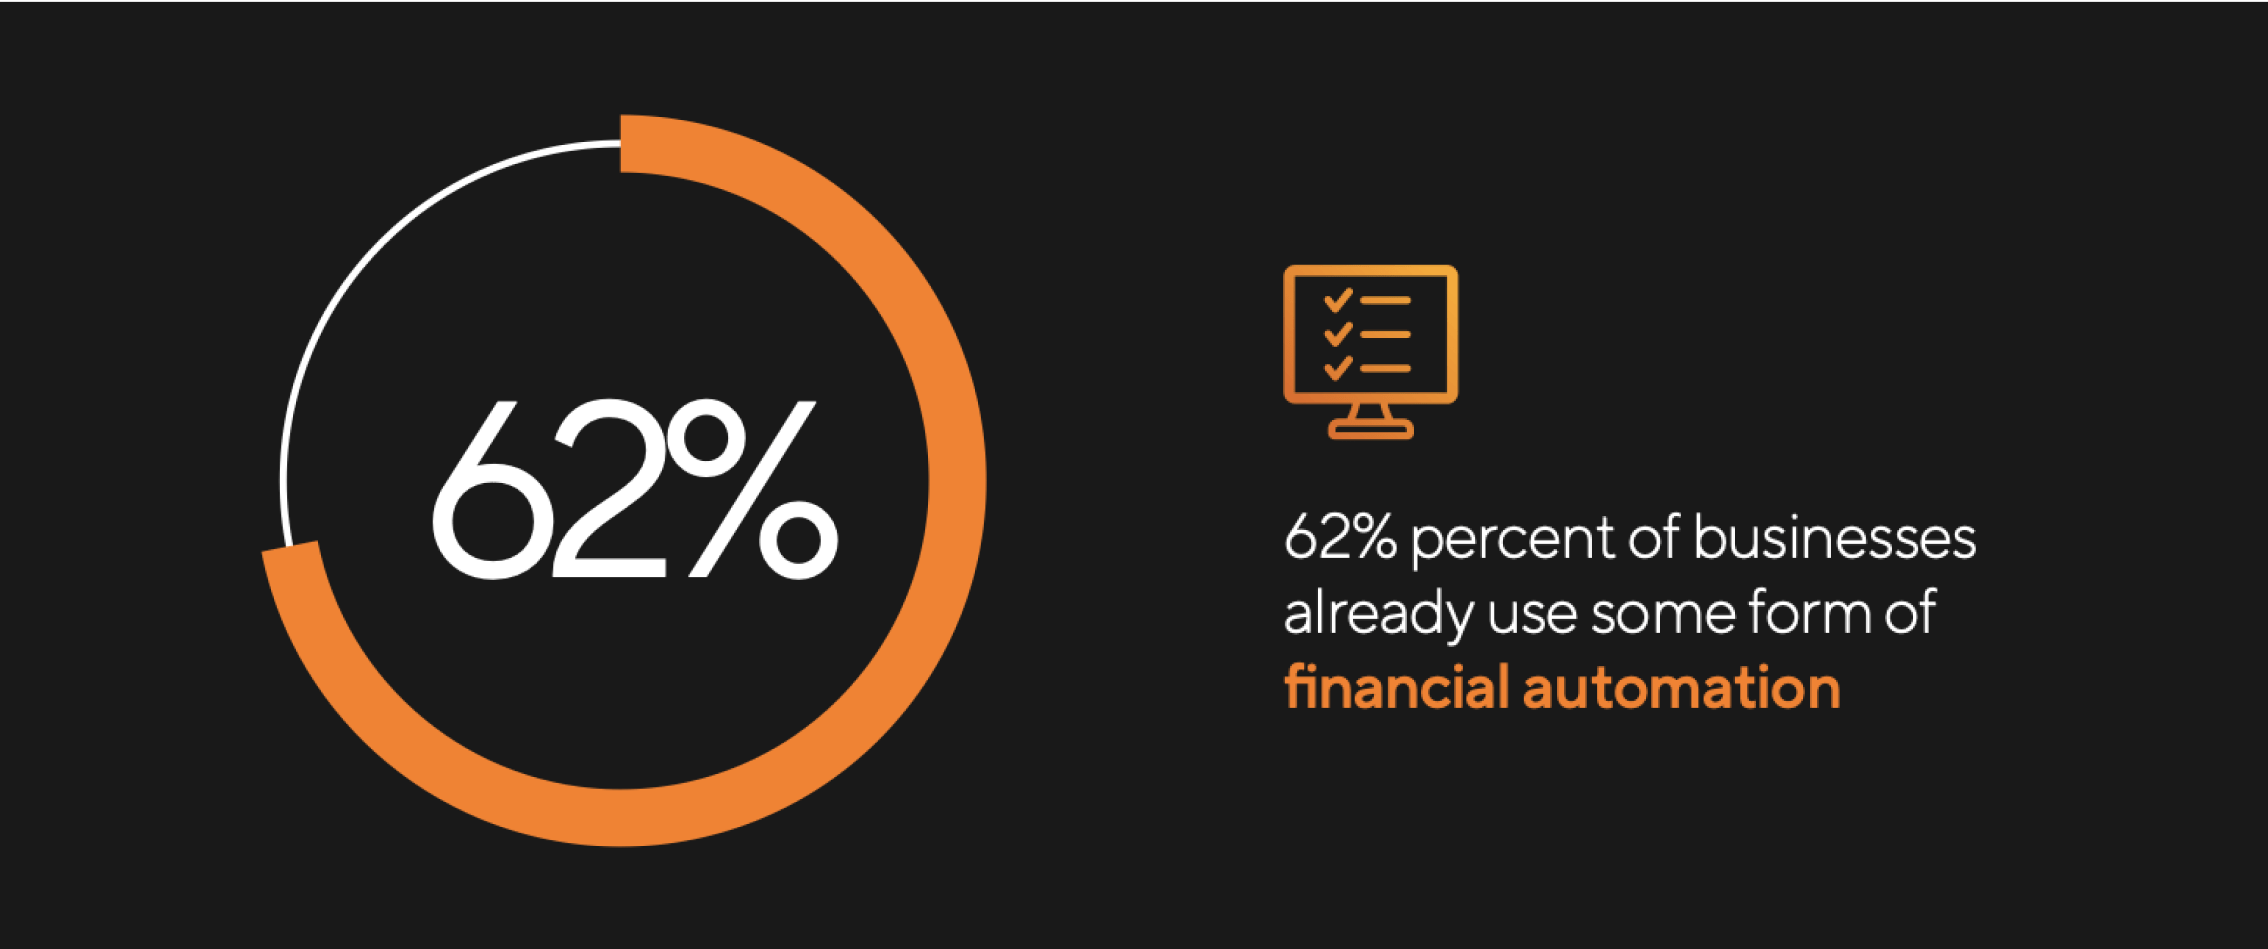 What financial technology tools and automations will drive bottom-line impact? 